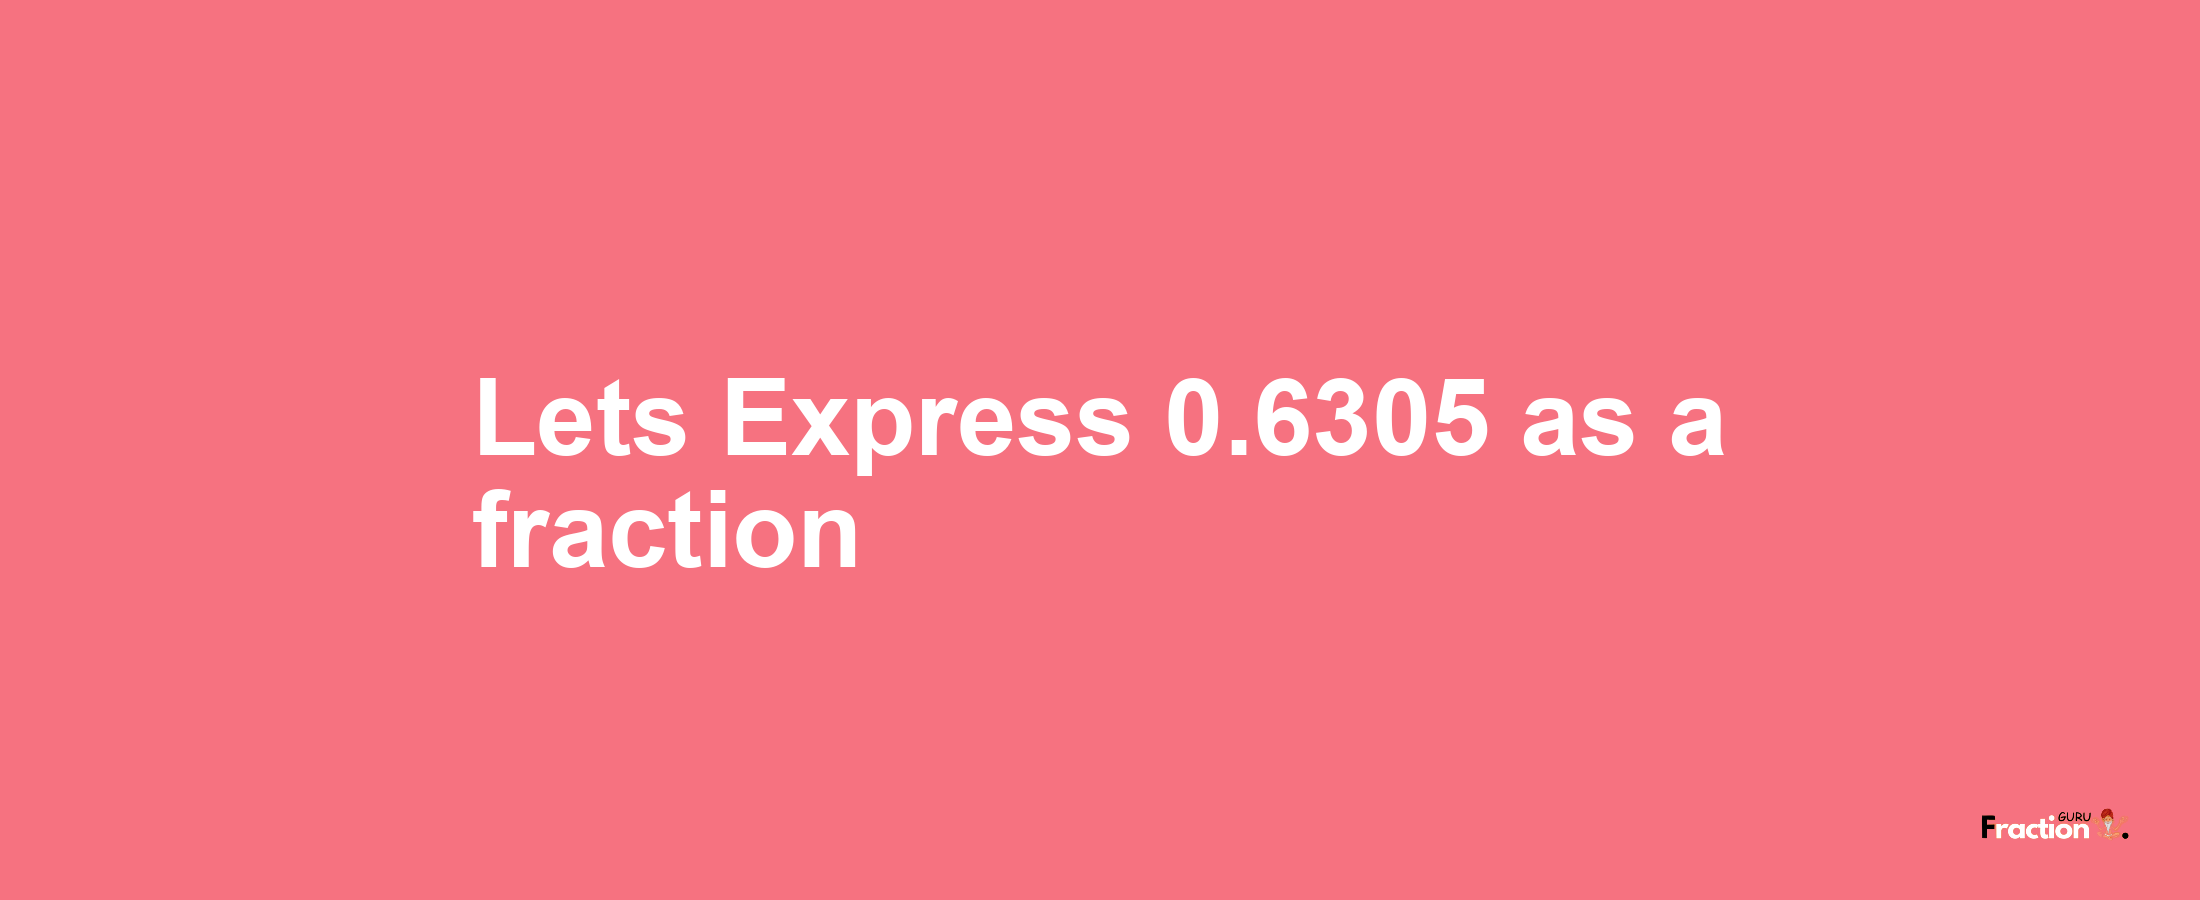 Lets Express 0.6305 as afraction